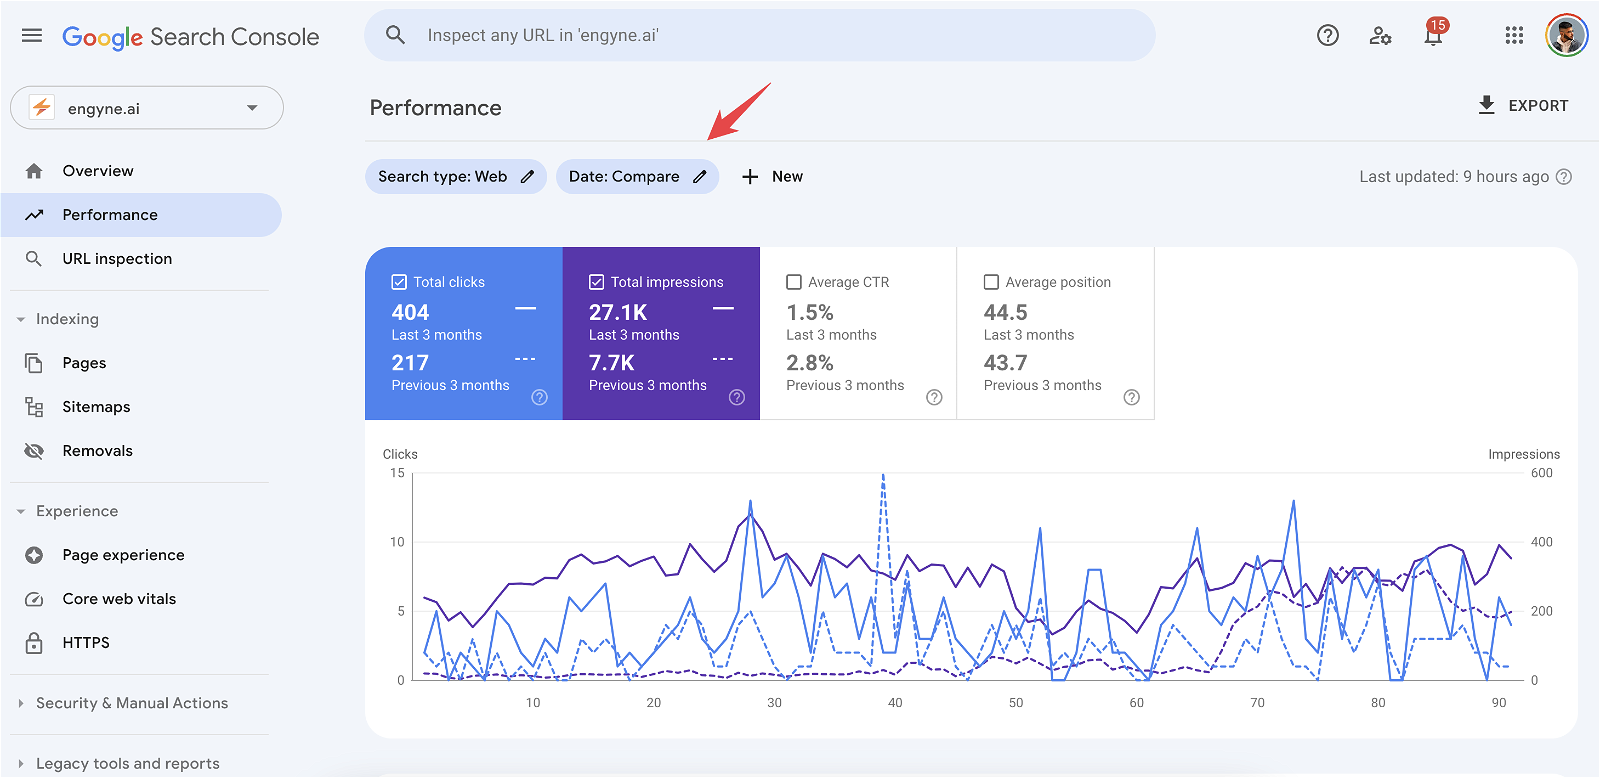 Comparing Google Search Console SEO performance data over 6 months